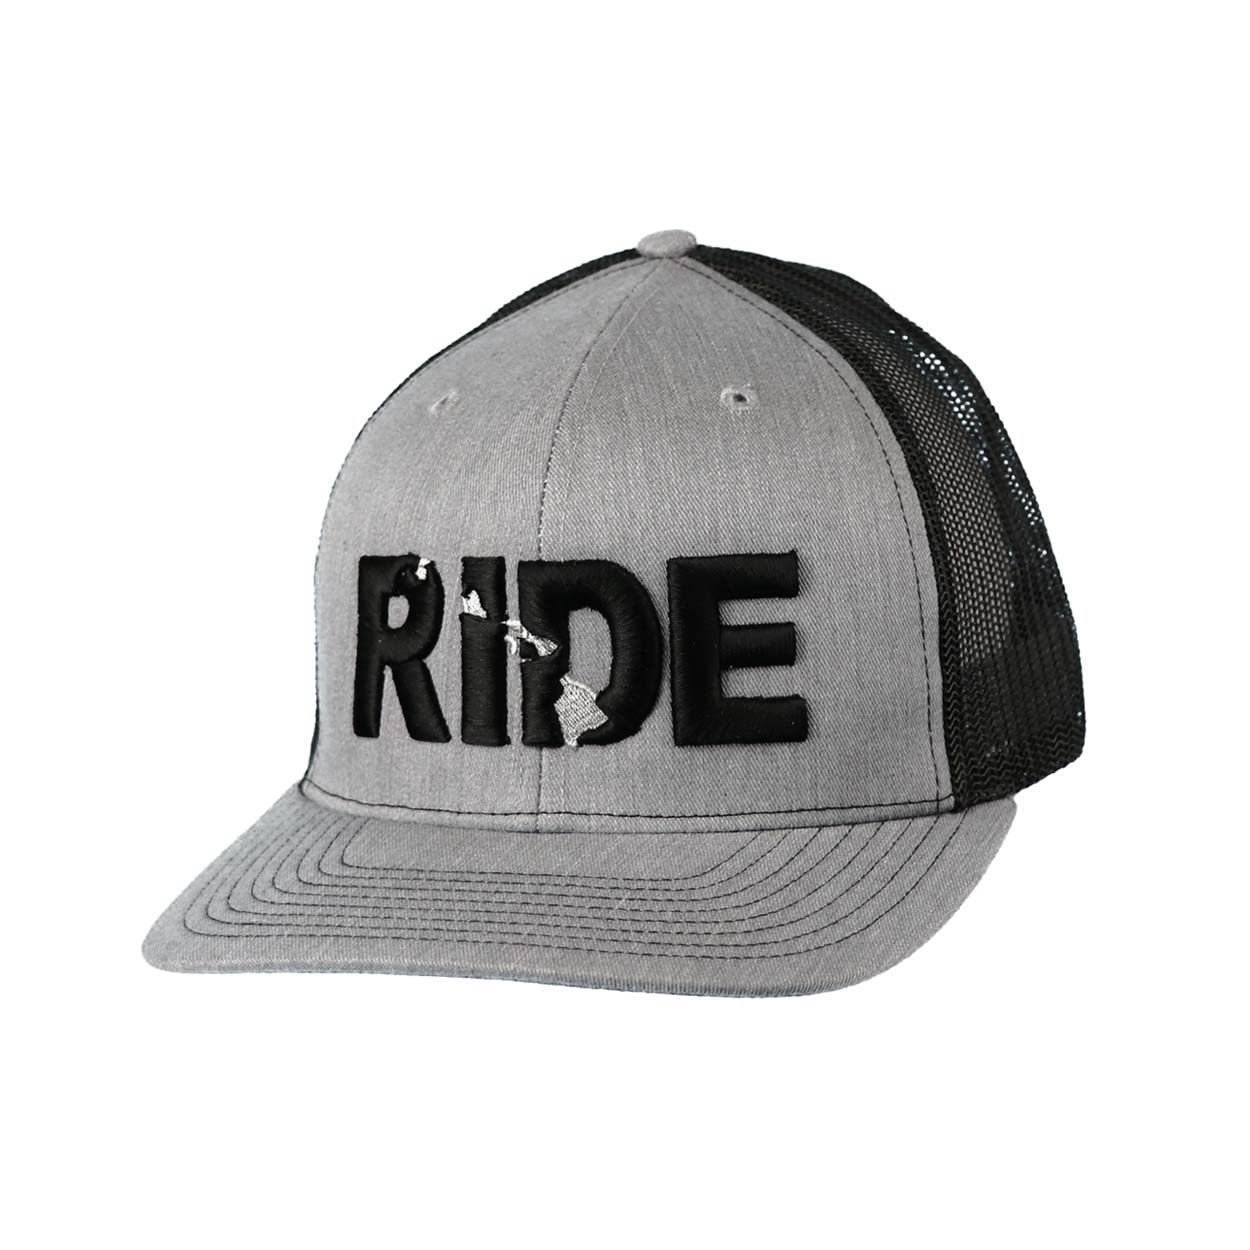 Ride Hawaii Classic Pro 3D Puff Embroidered Snapback Trucker Hat Heather Gray/Black